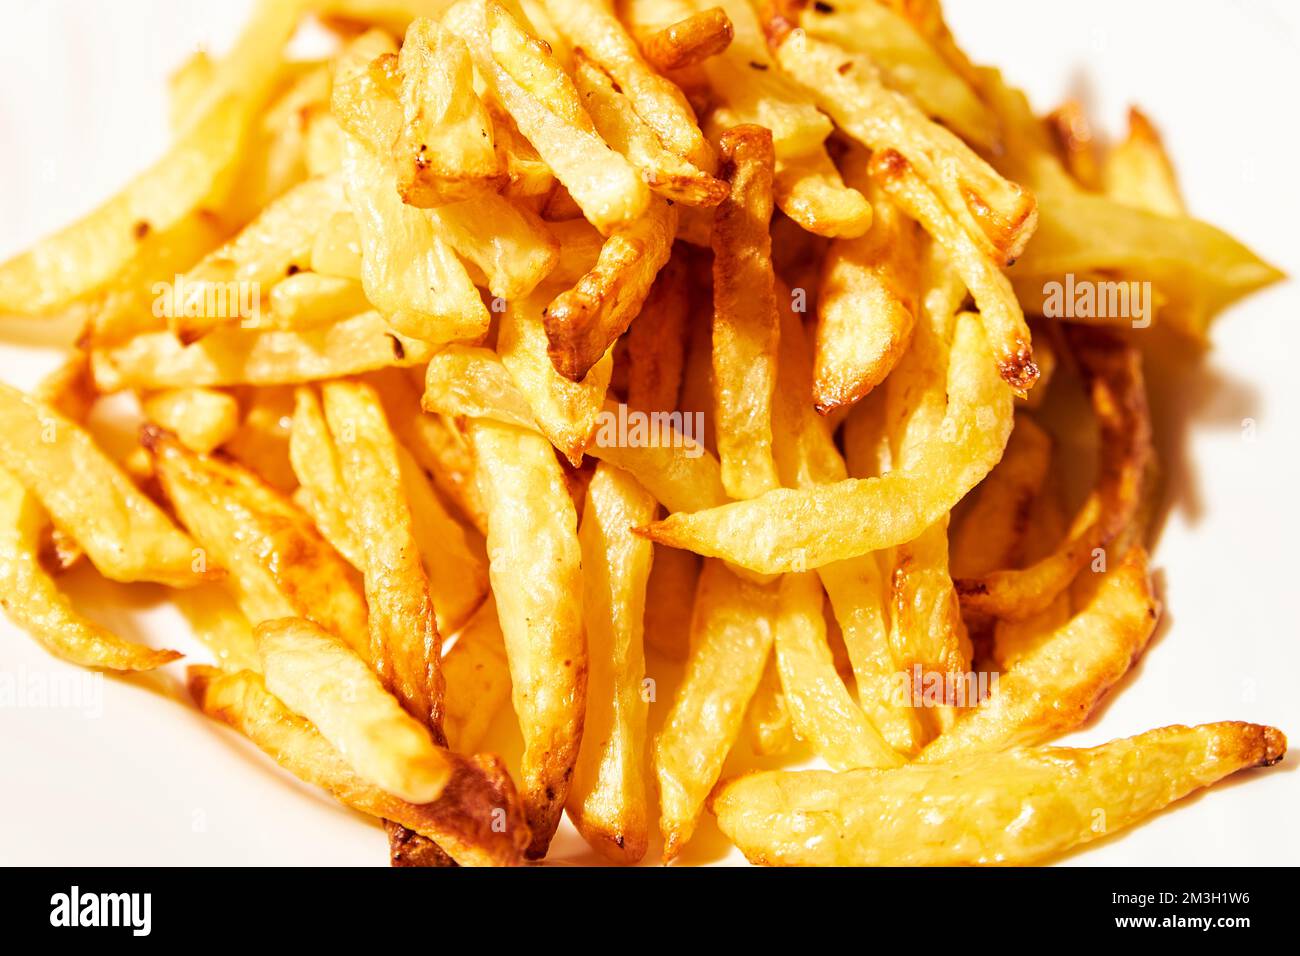 French fries on a white plate. Greasy and unhealthy food Stock Photo